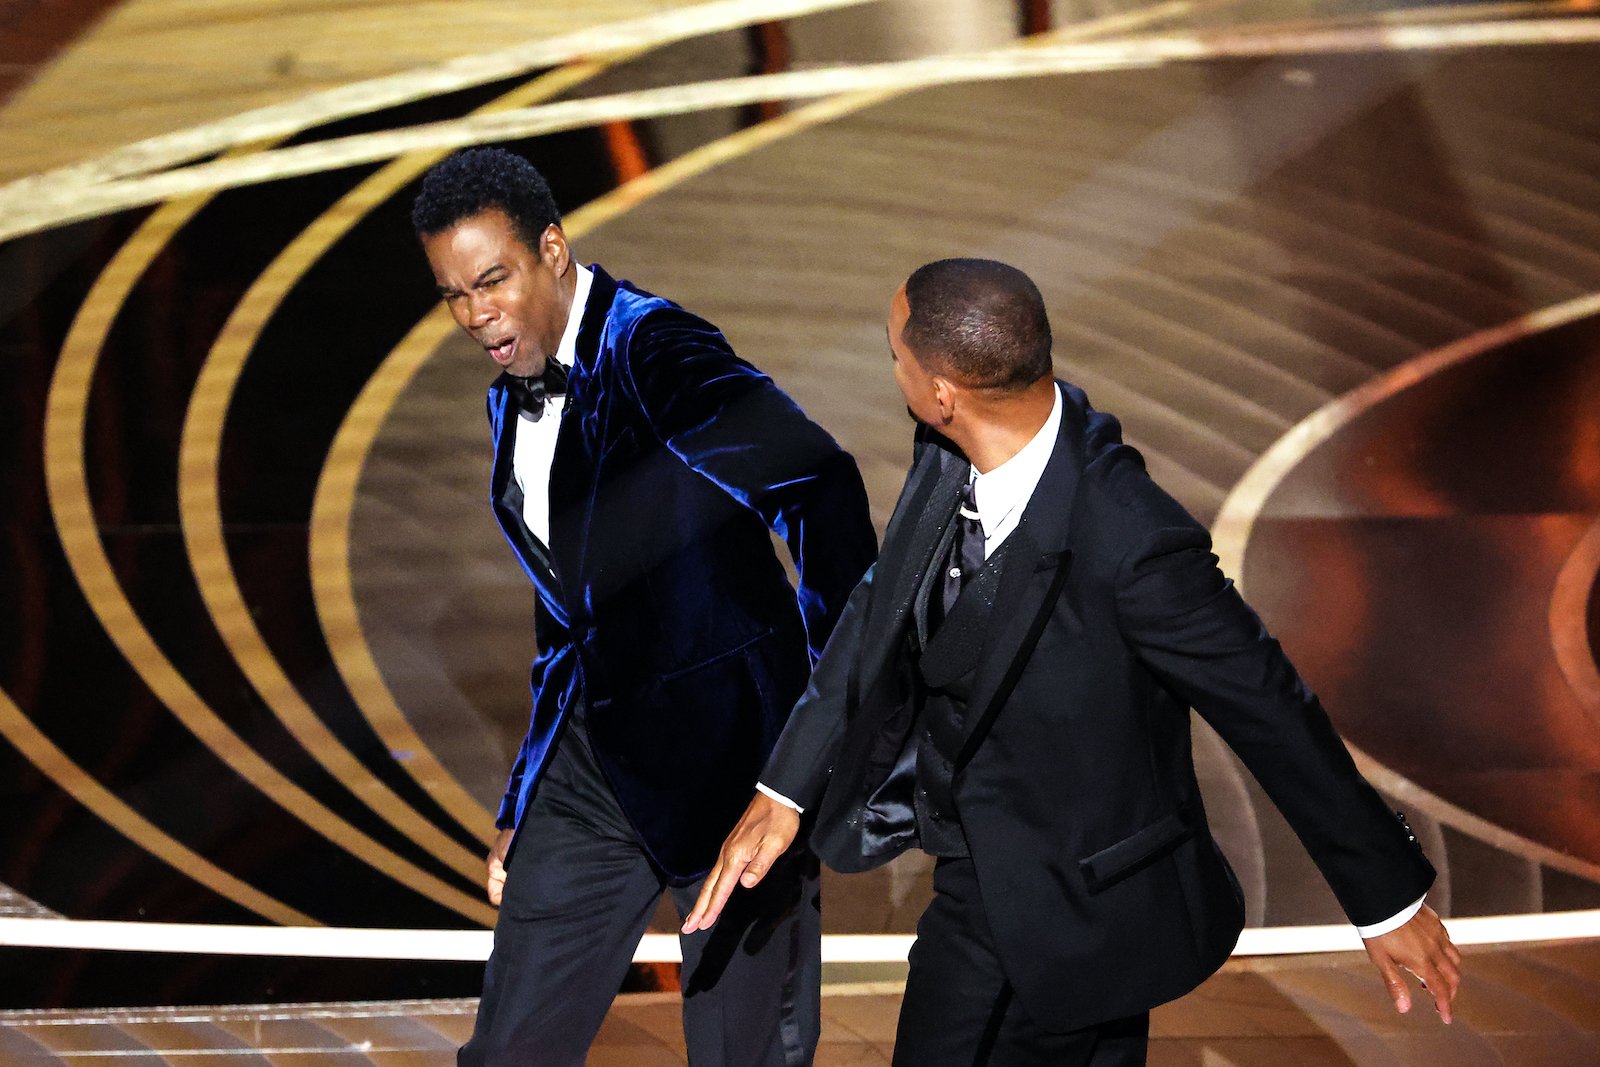 Will Smith slaps Chris Rock during the Academy Awards ceremony in 2022